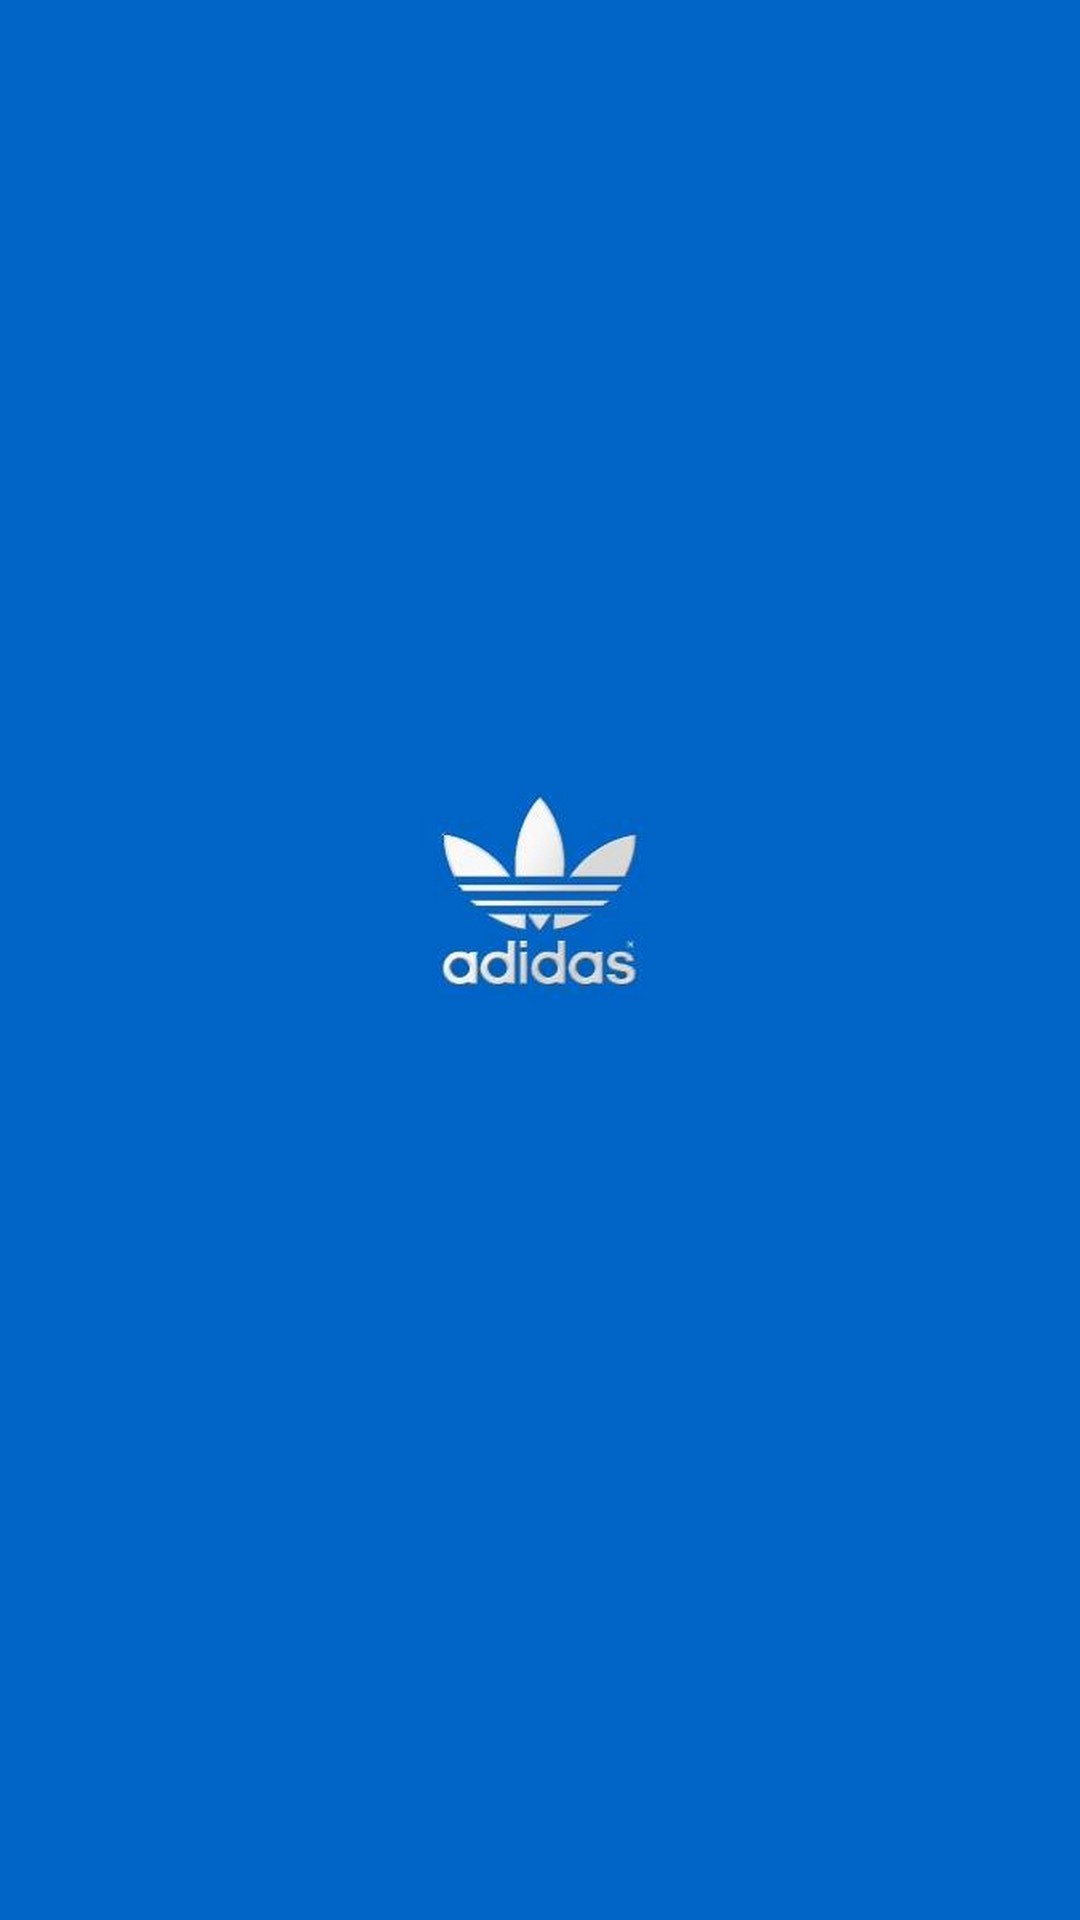 Adidas Logo Wallpaper iPhone With high-resolution 1080X1920 pixel. You can use this wallpaper for your iPhone 5, 6, 7, 8, X, XS, XR backgrounds, Mobile Screensaver, or iPad Lock Screen